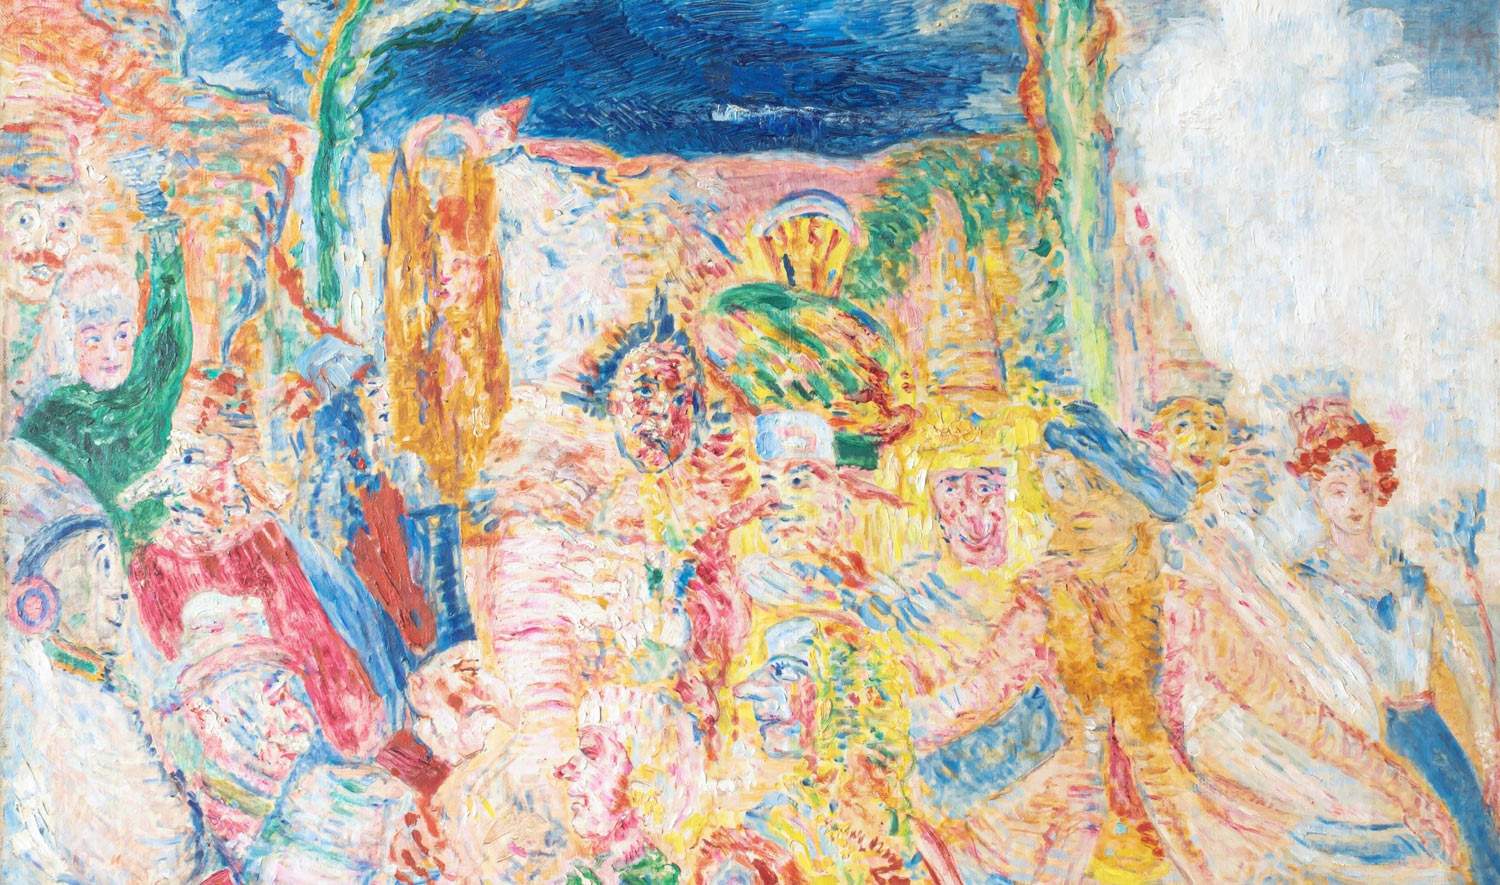 Belgium, platform launched to buy shares in a work by James Ensor